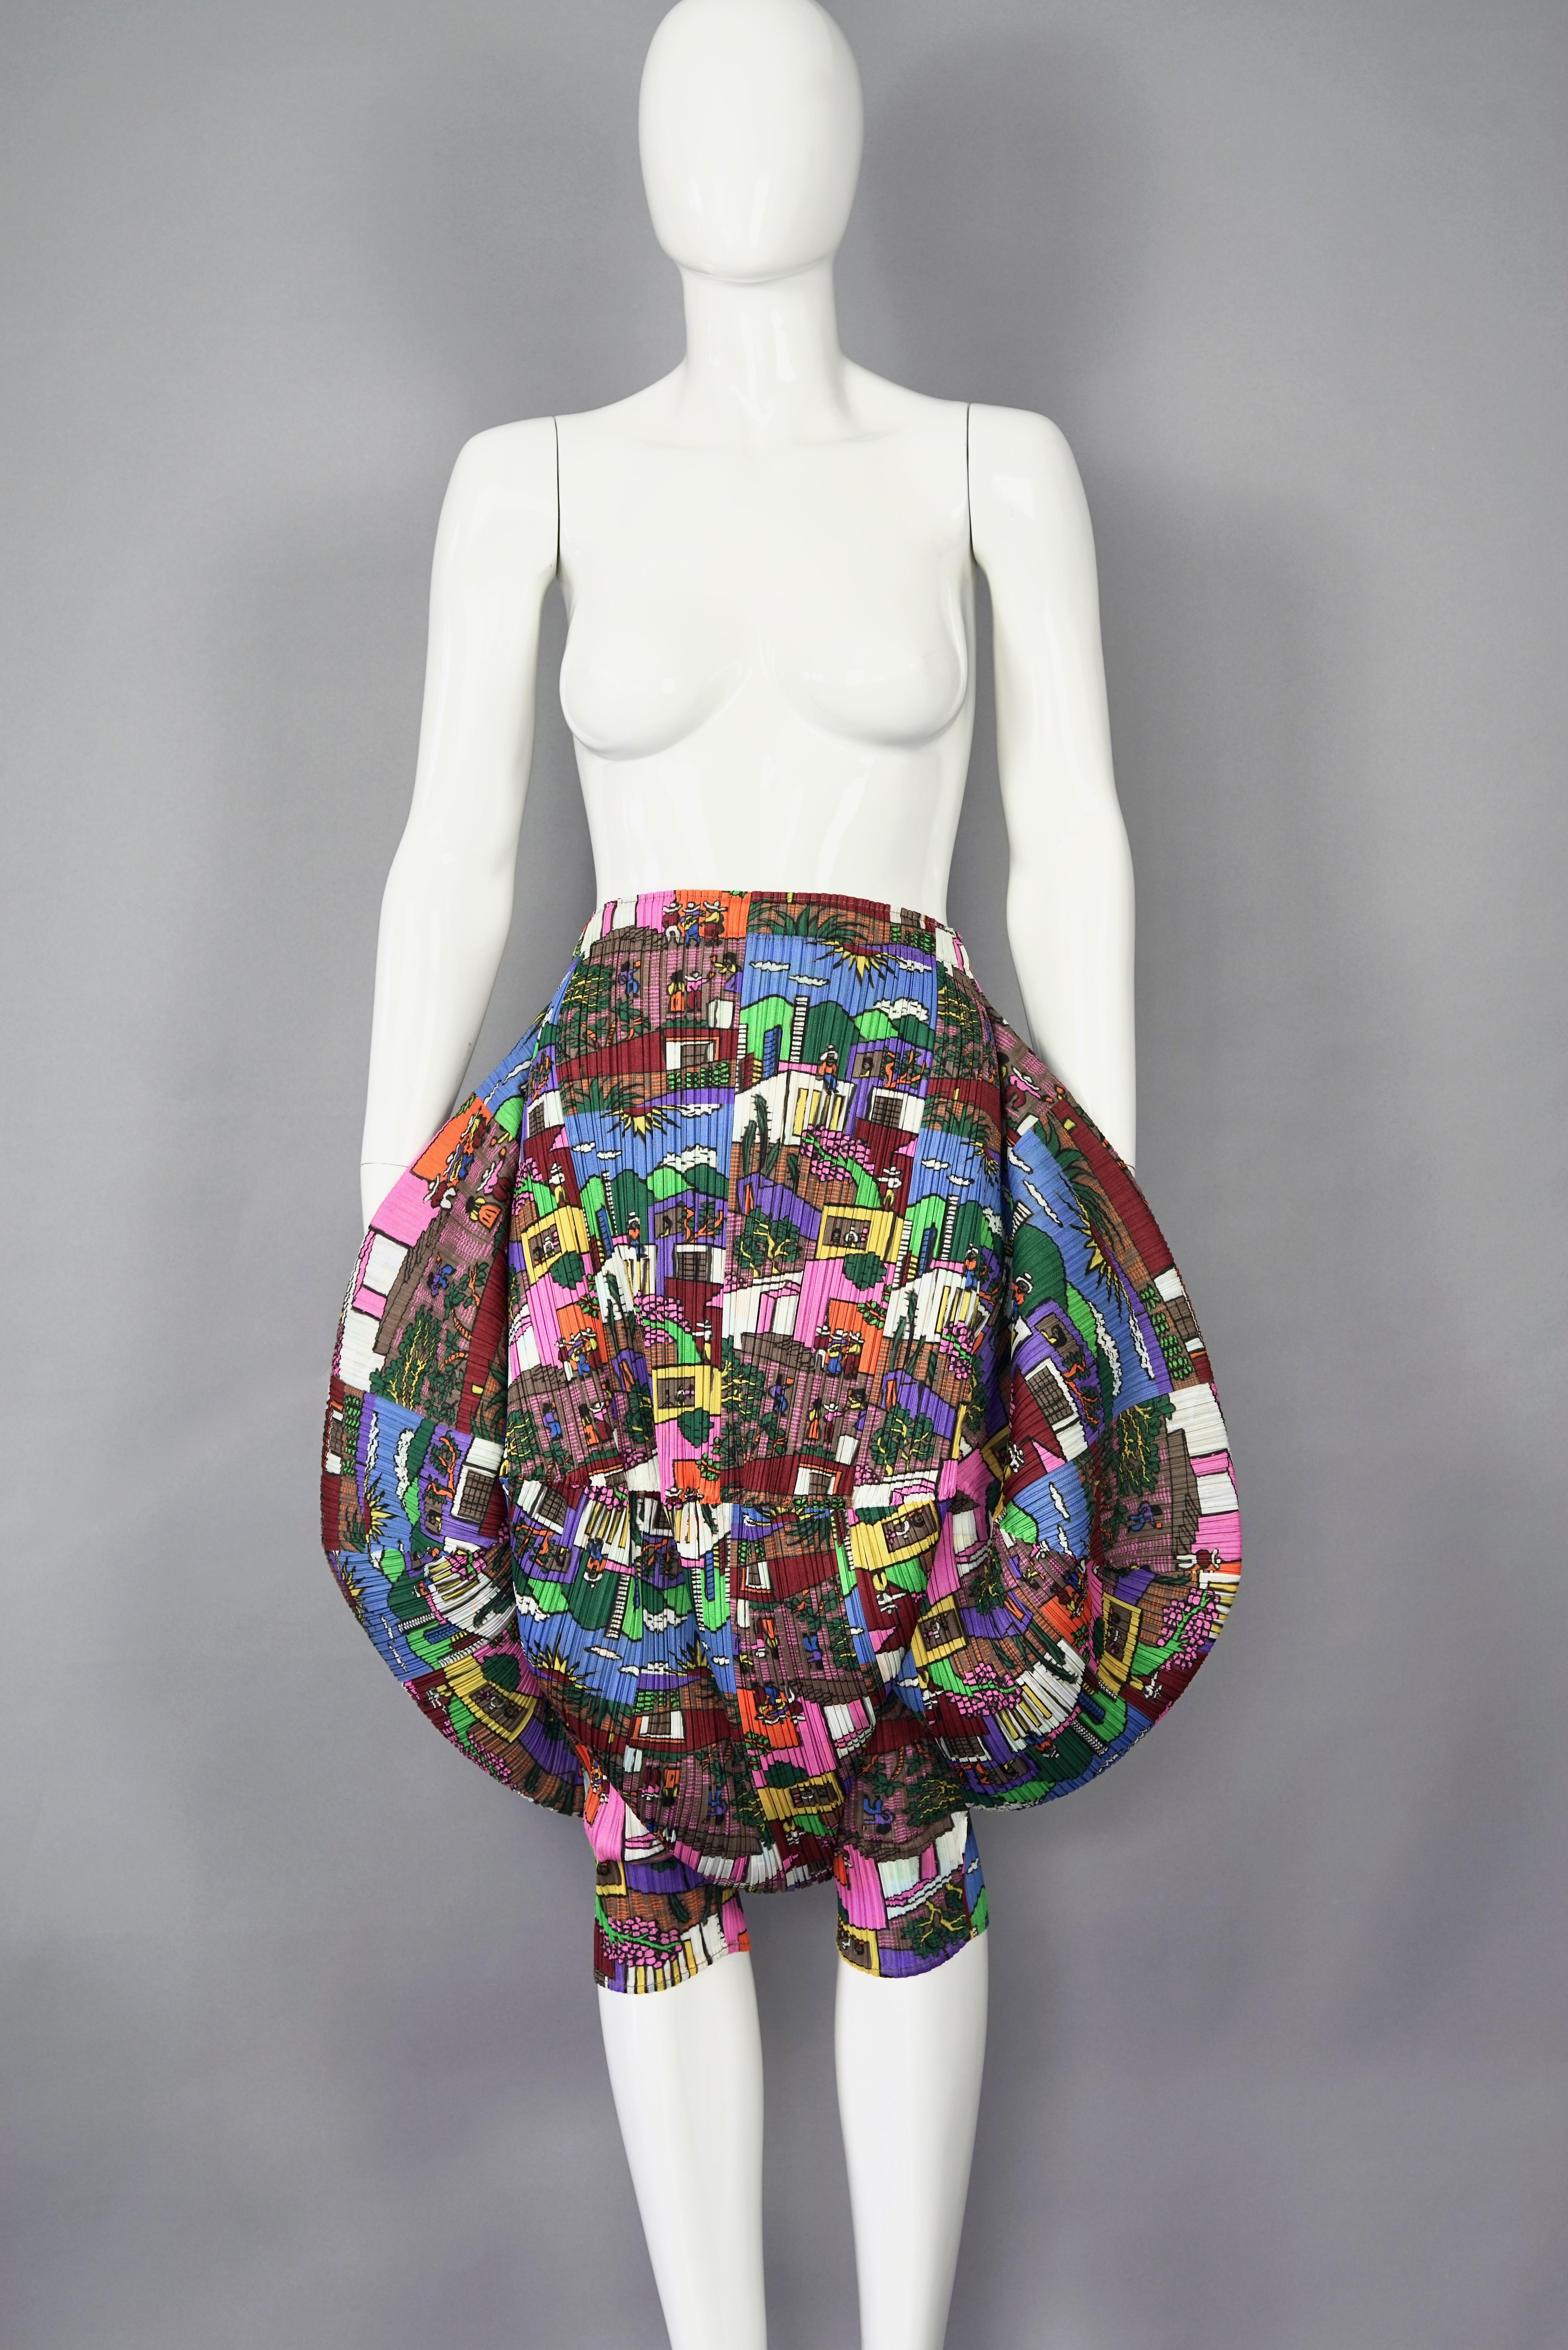 Vintage ISSEY MIYAKE Pop Art Print Pleats Please Structural Harem Jodhpur Pants

Approximate measurements taken laid flat, please double waist and hips:
Waist: 12.60 inches (32 cm)
Hips: 53.15 inches (135 cm)
Length: 27.55 inches (70